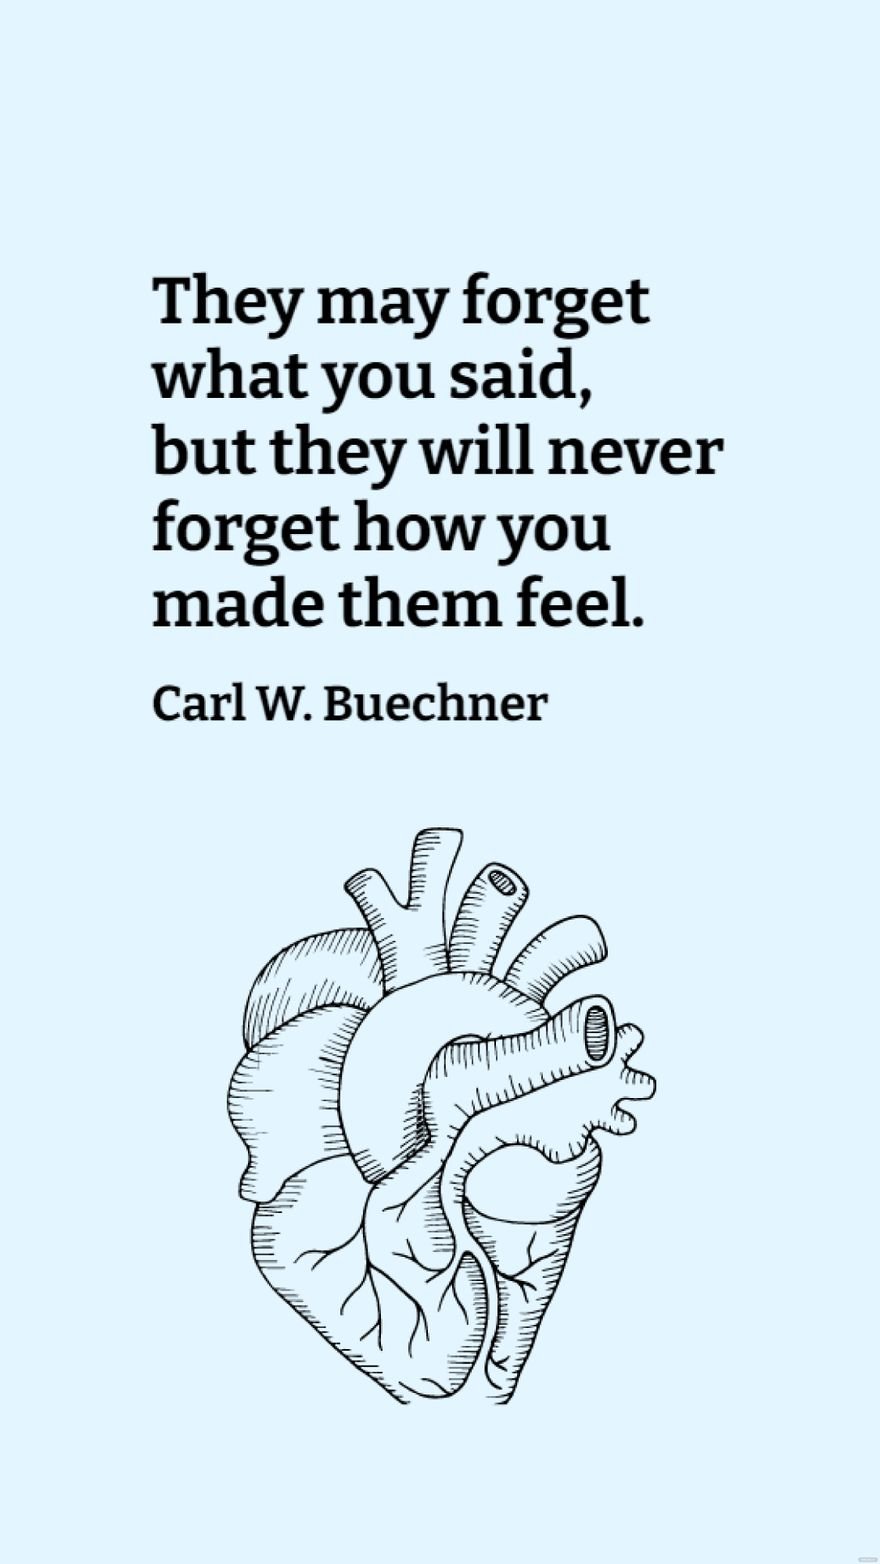 Carl W. Buechner -They may forget what you said, but they will never forget how you made them feel.